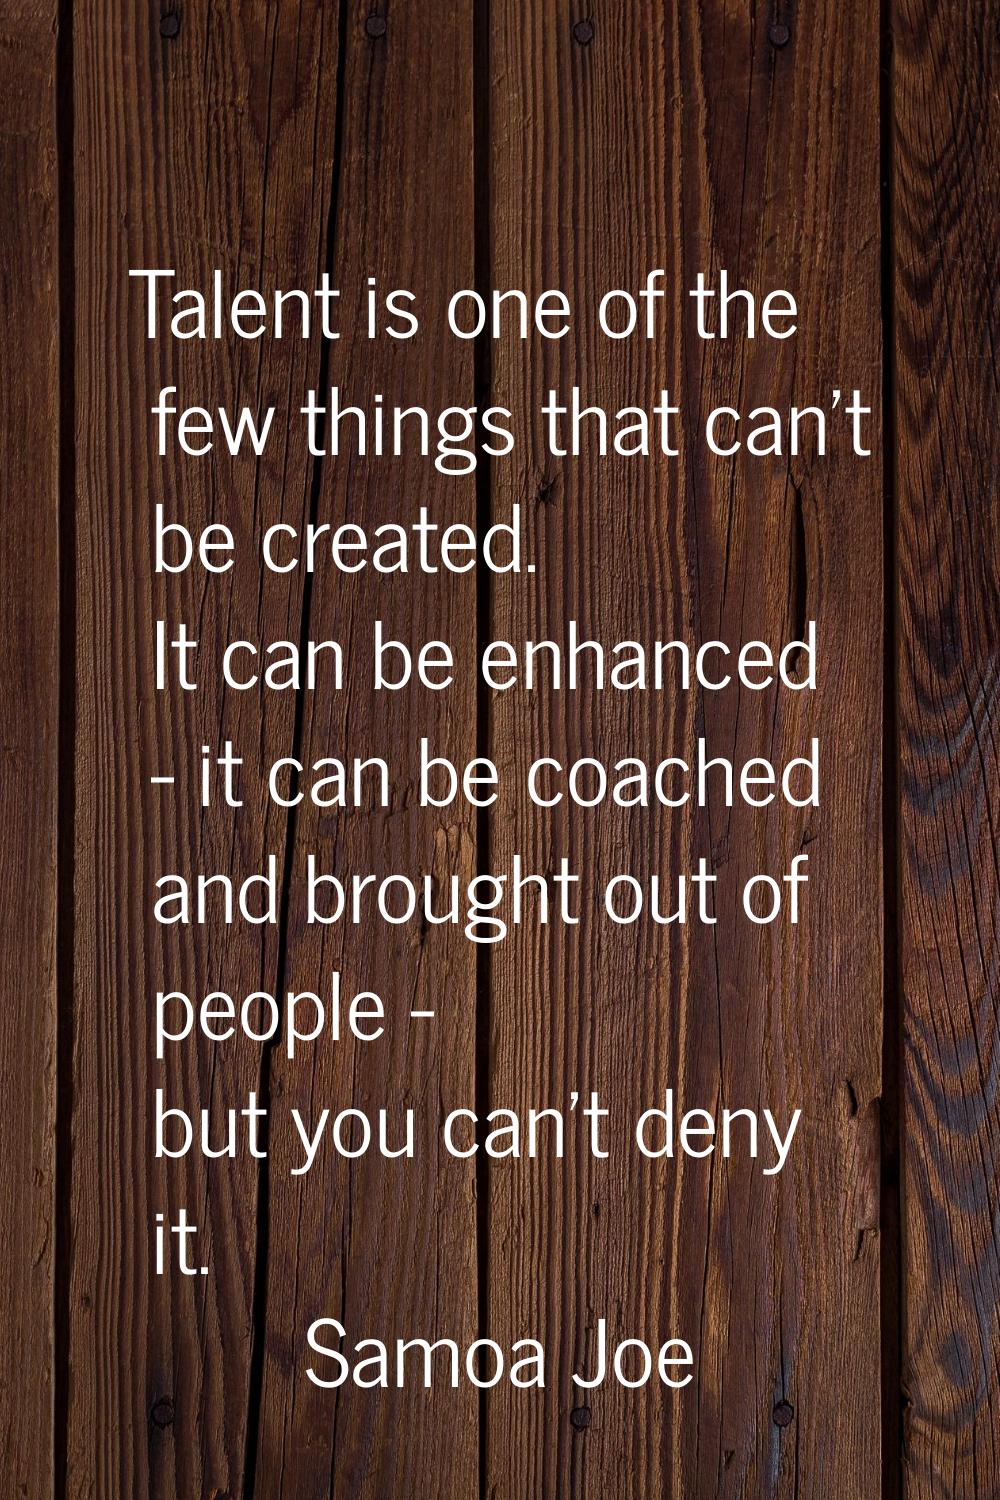 Talent is one of the few things that can't be created. It can be enhanced - it can be coached and b